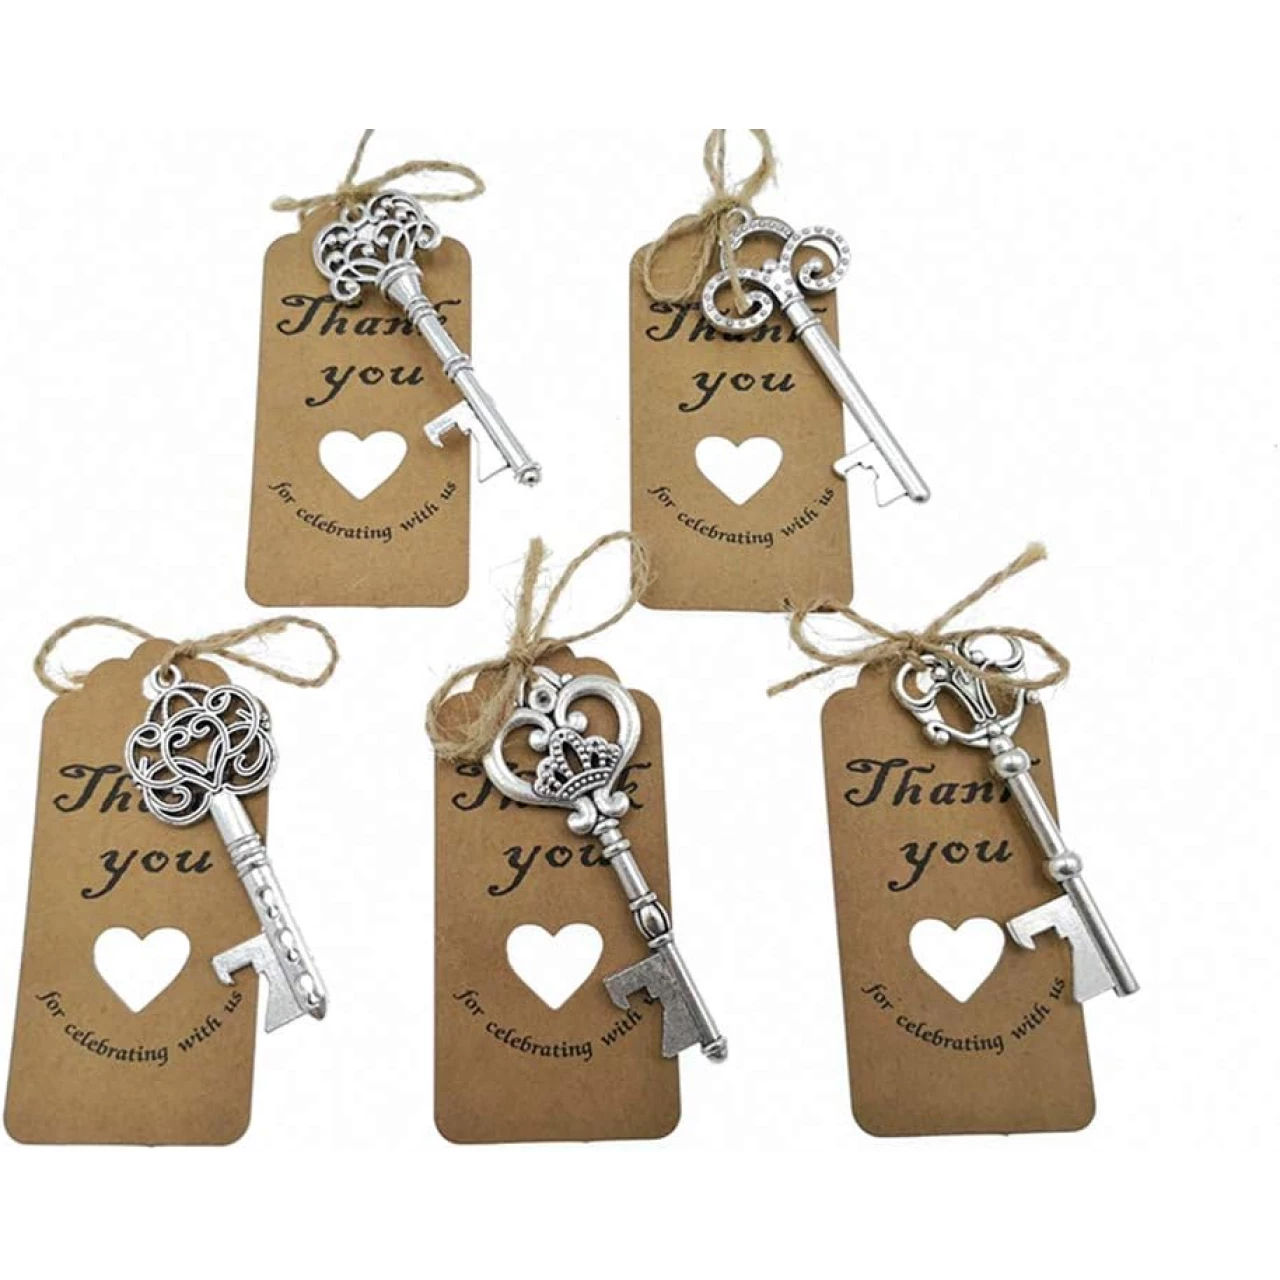 50pcs Skeleton Key Bottle Opener Wedding Party Favor Souvenir Gift with Escort Tag and Jute Rope(Silver Tone,5 styles)